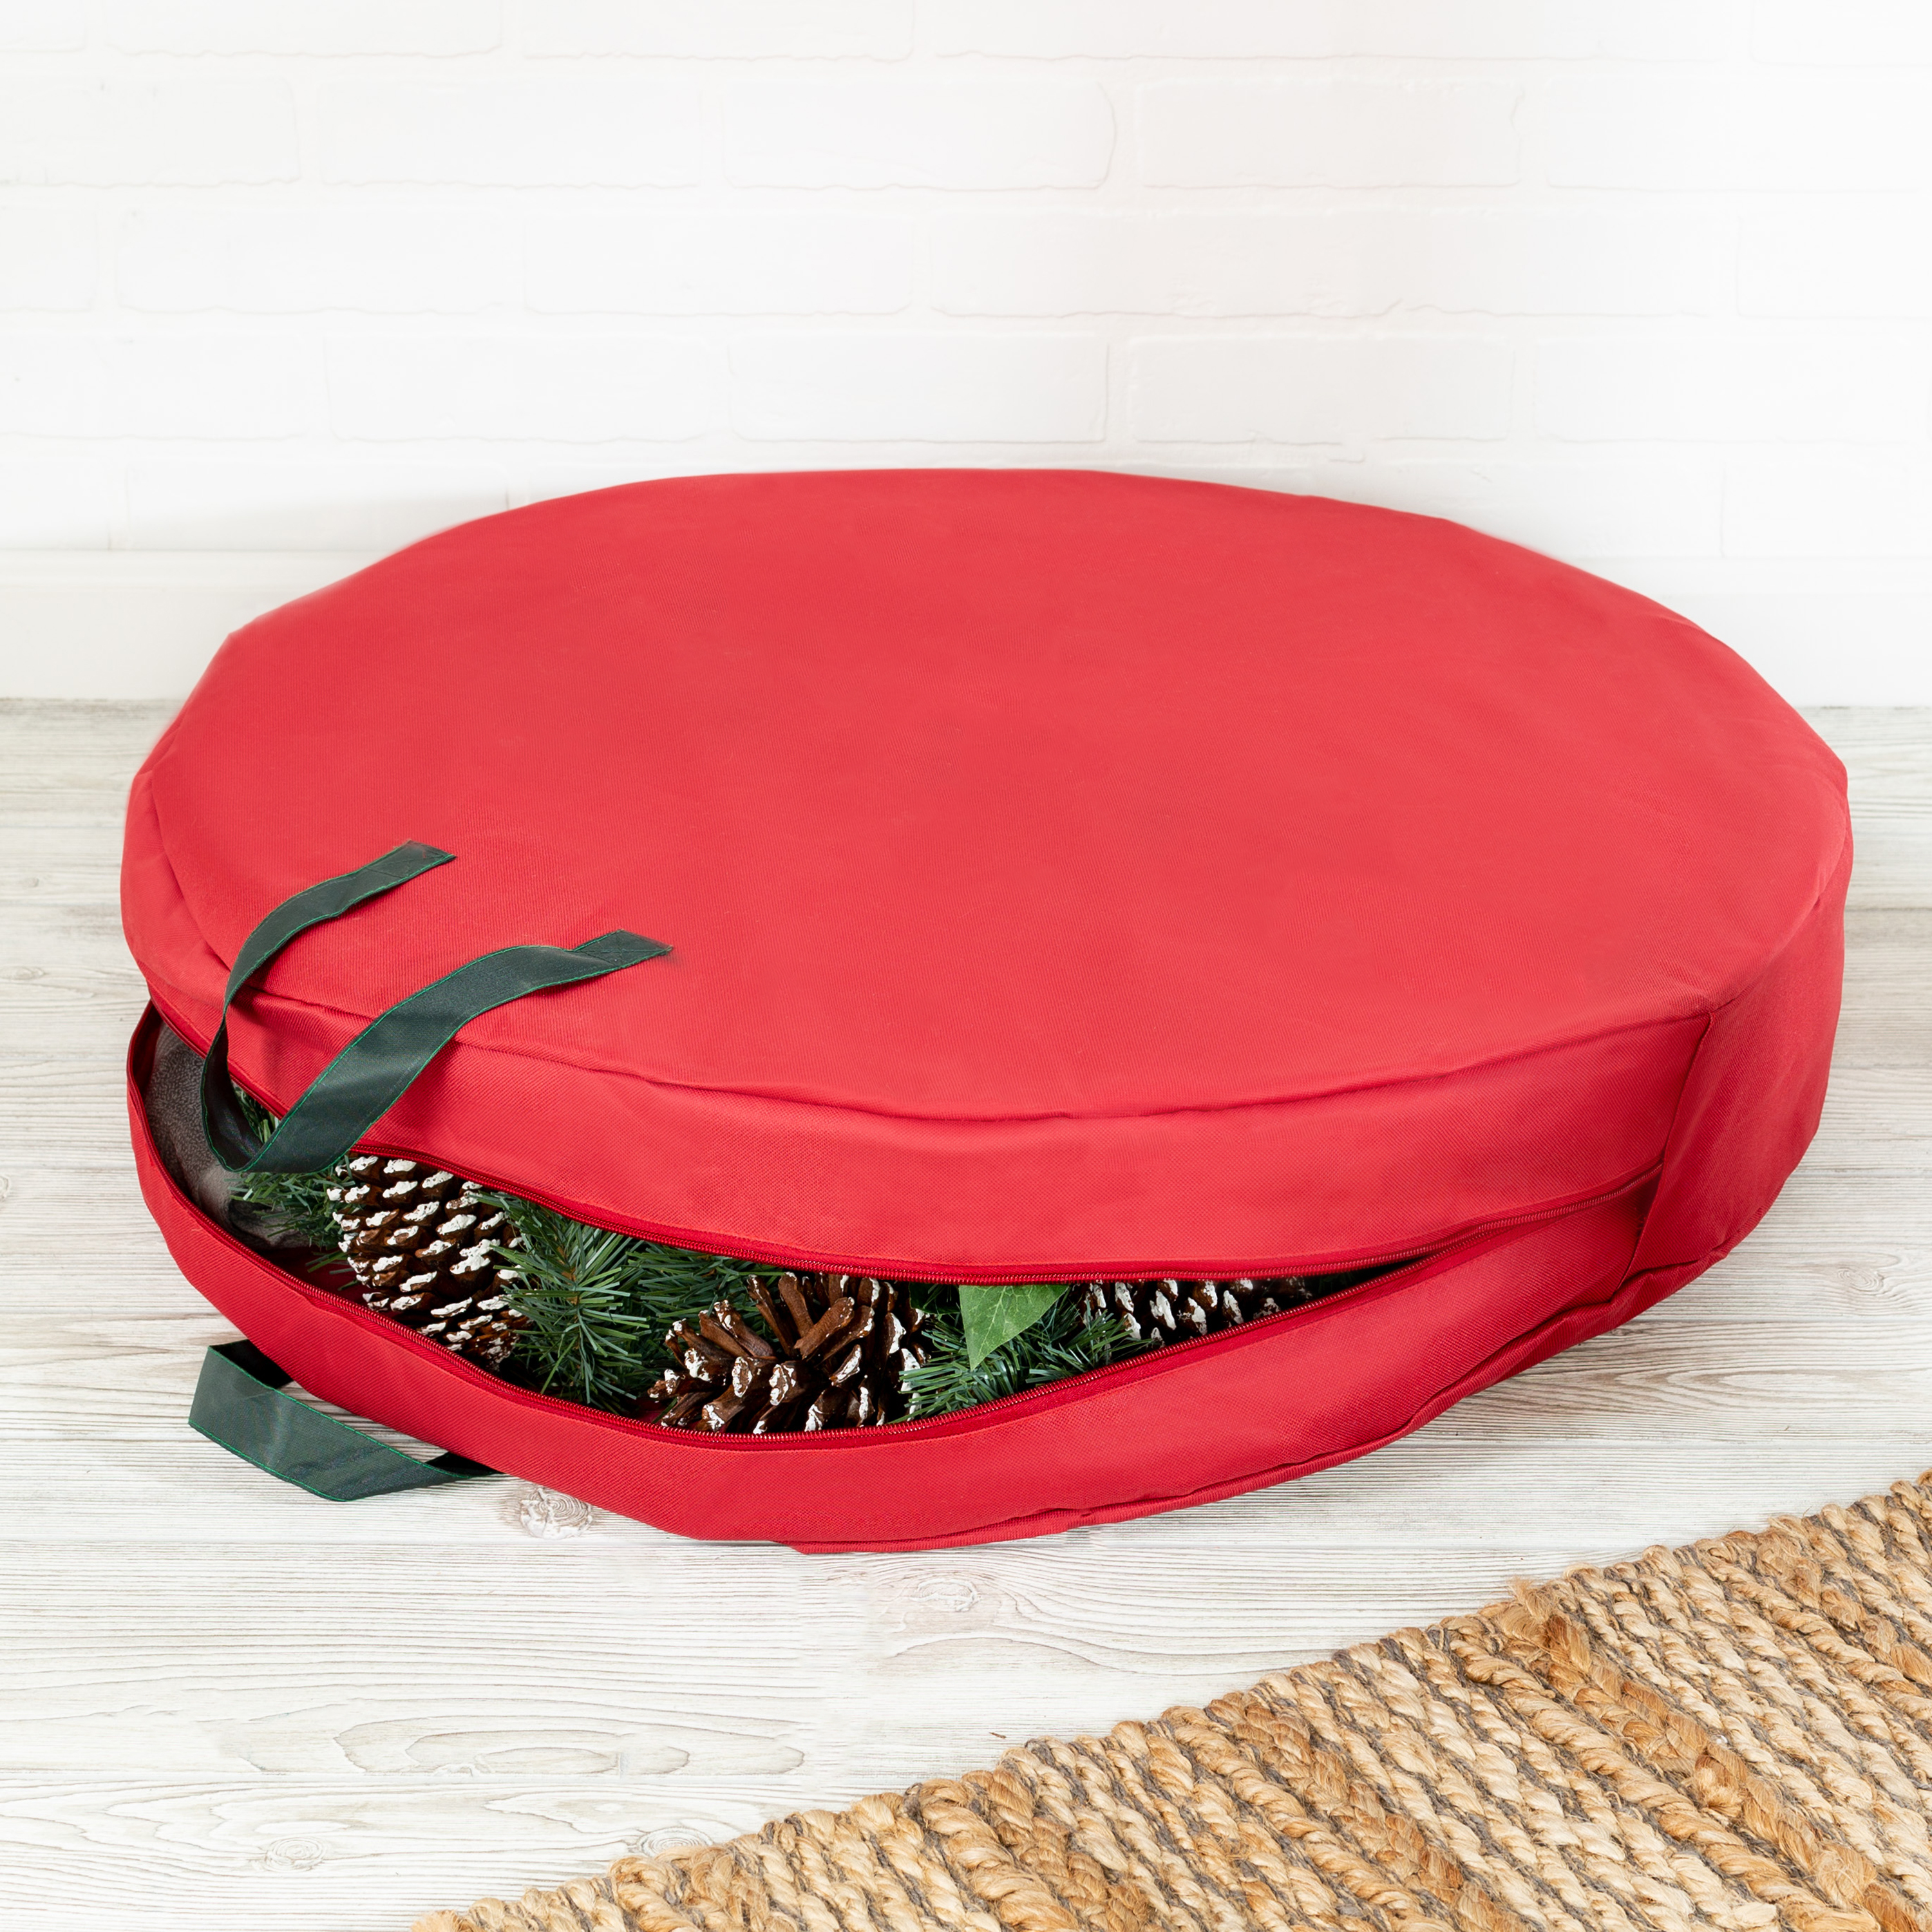 Honey-Can-Do 30" Polyester Wreath Storage Bag with Handles, Red - image 1 of 5